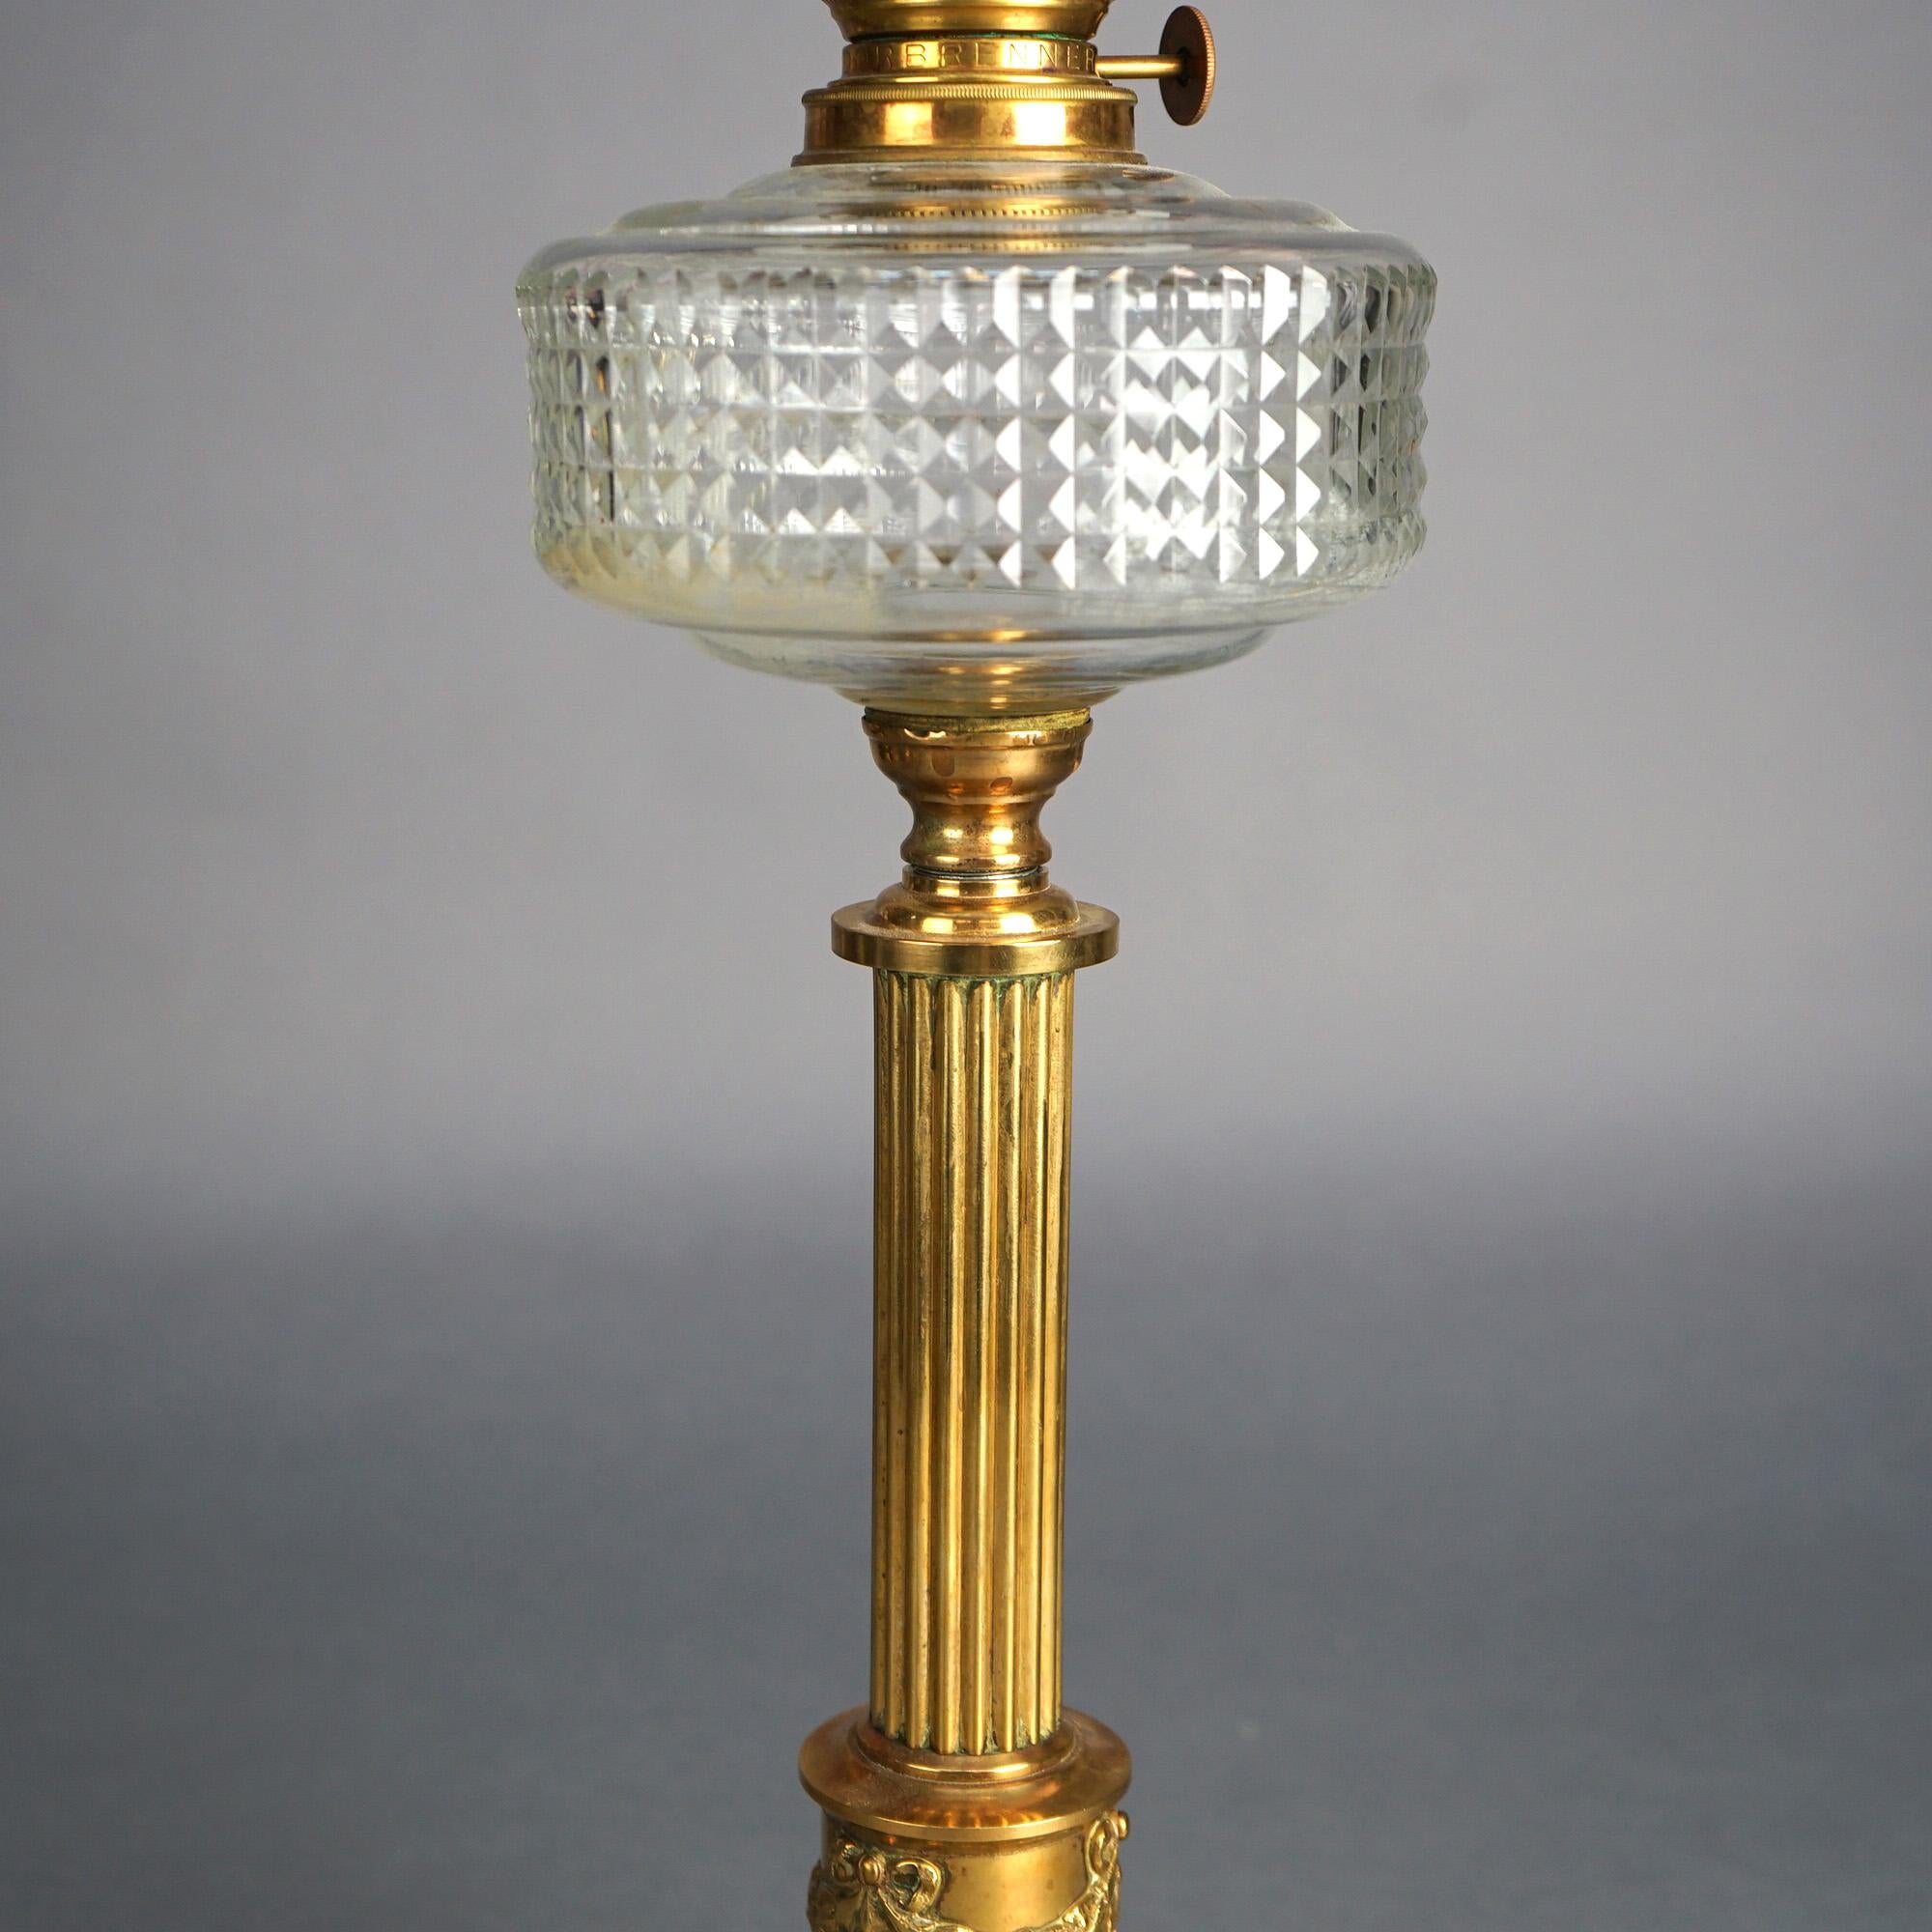 Antique Neoclassical Bronze Oil Lamp with Floral Ripple Glass Shade C1890 4